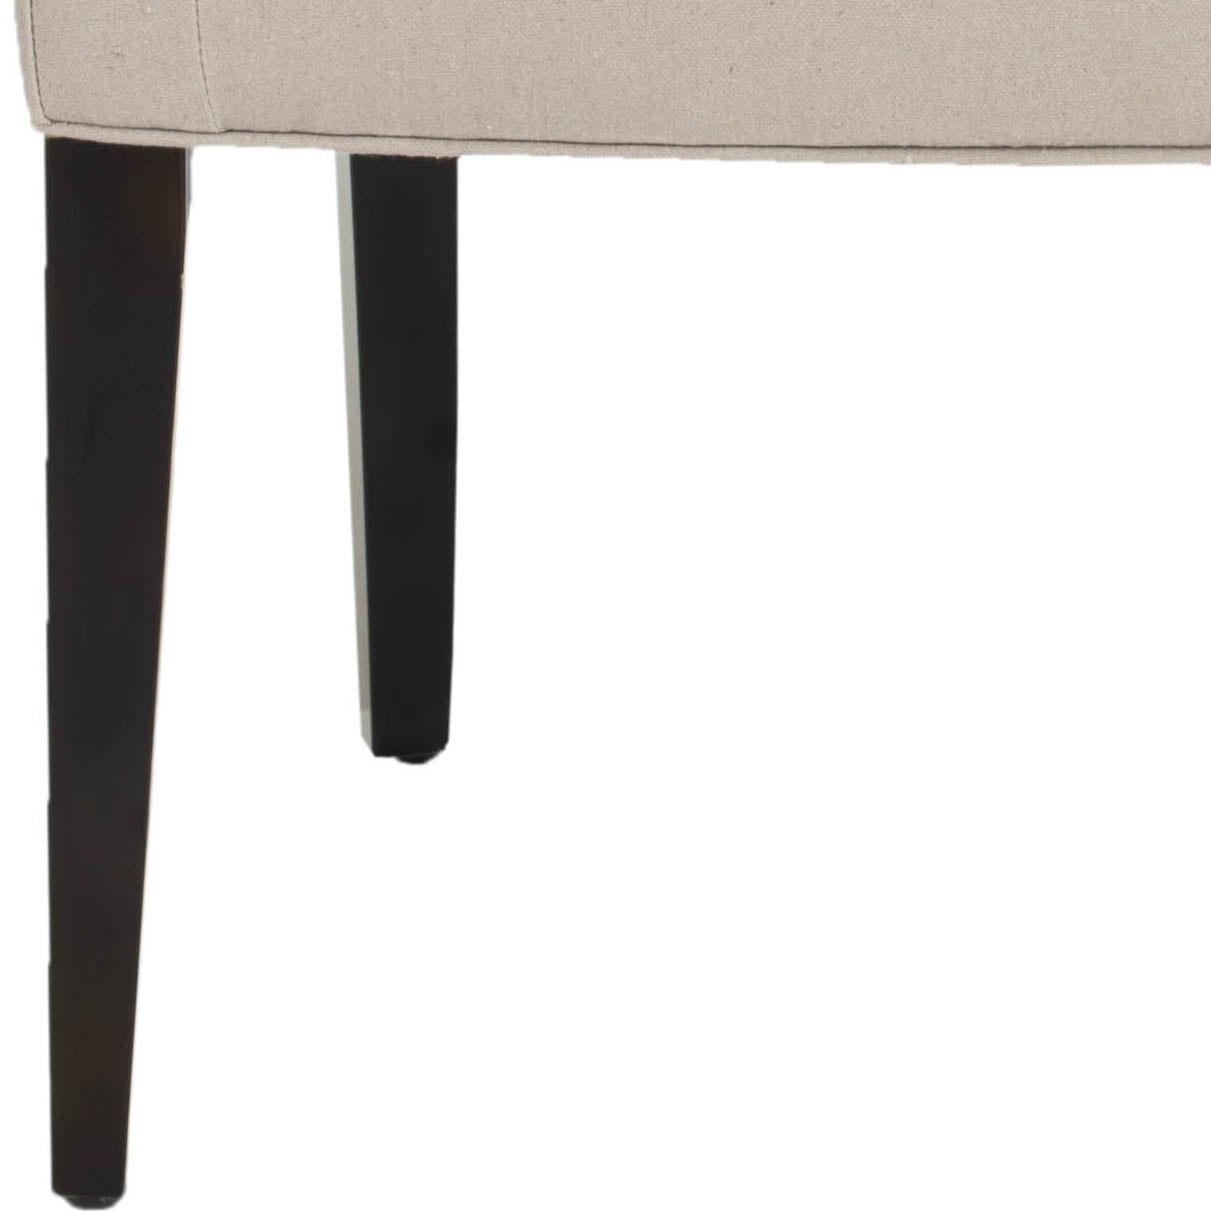 Dale Arm Chair - Taupe/Espresso - Arlo Home - Image 1